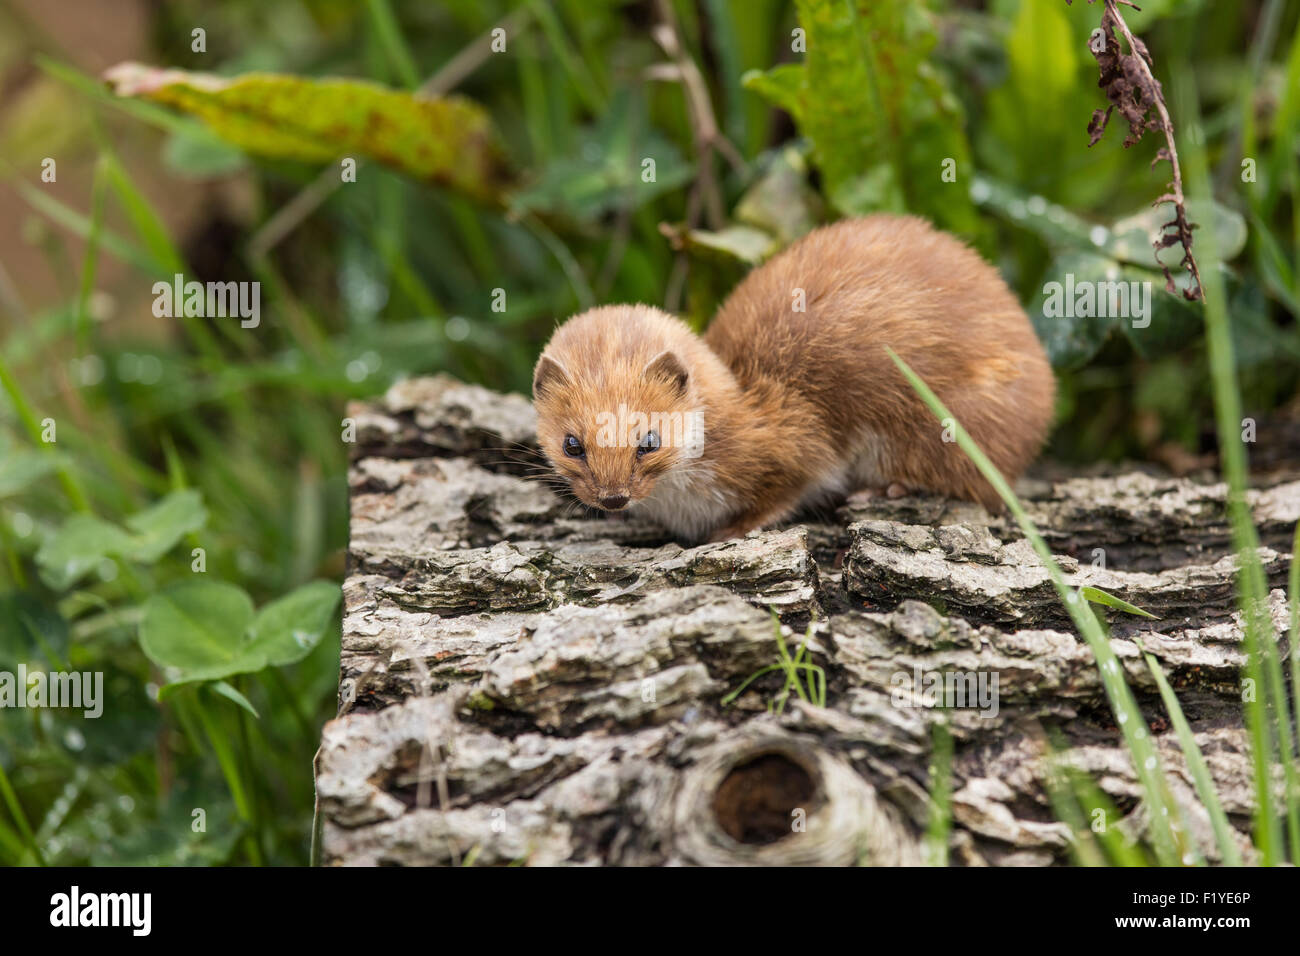 Weasel on a log Stock Photo